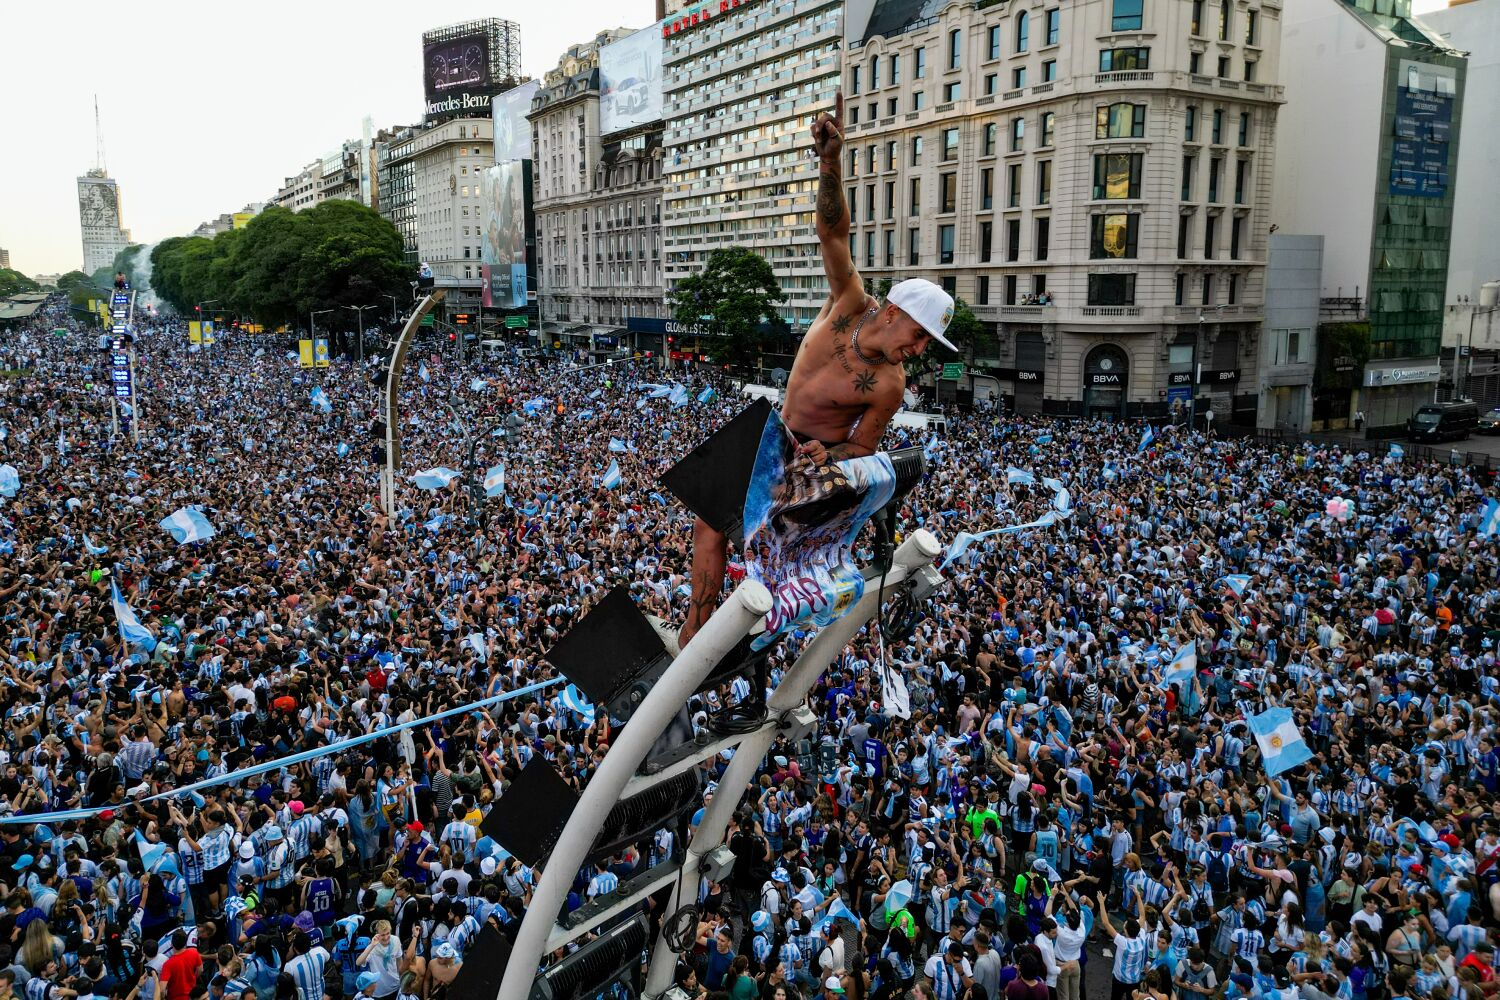 In soccer-crazed Argentina, 'Muchachos' carries the dreams of a country